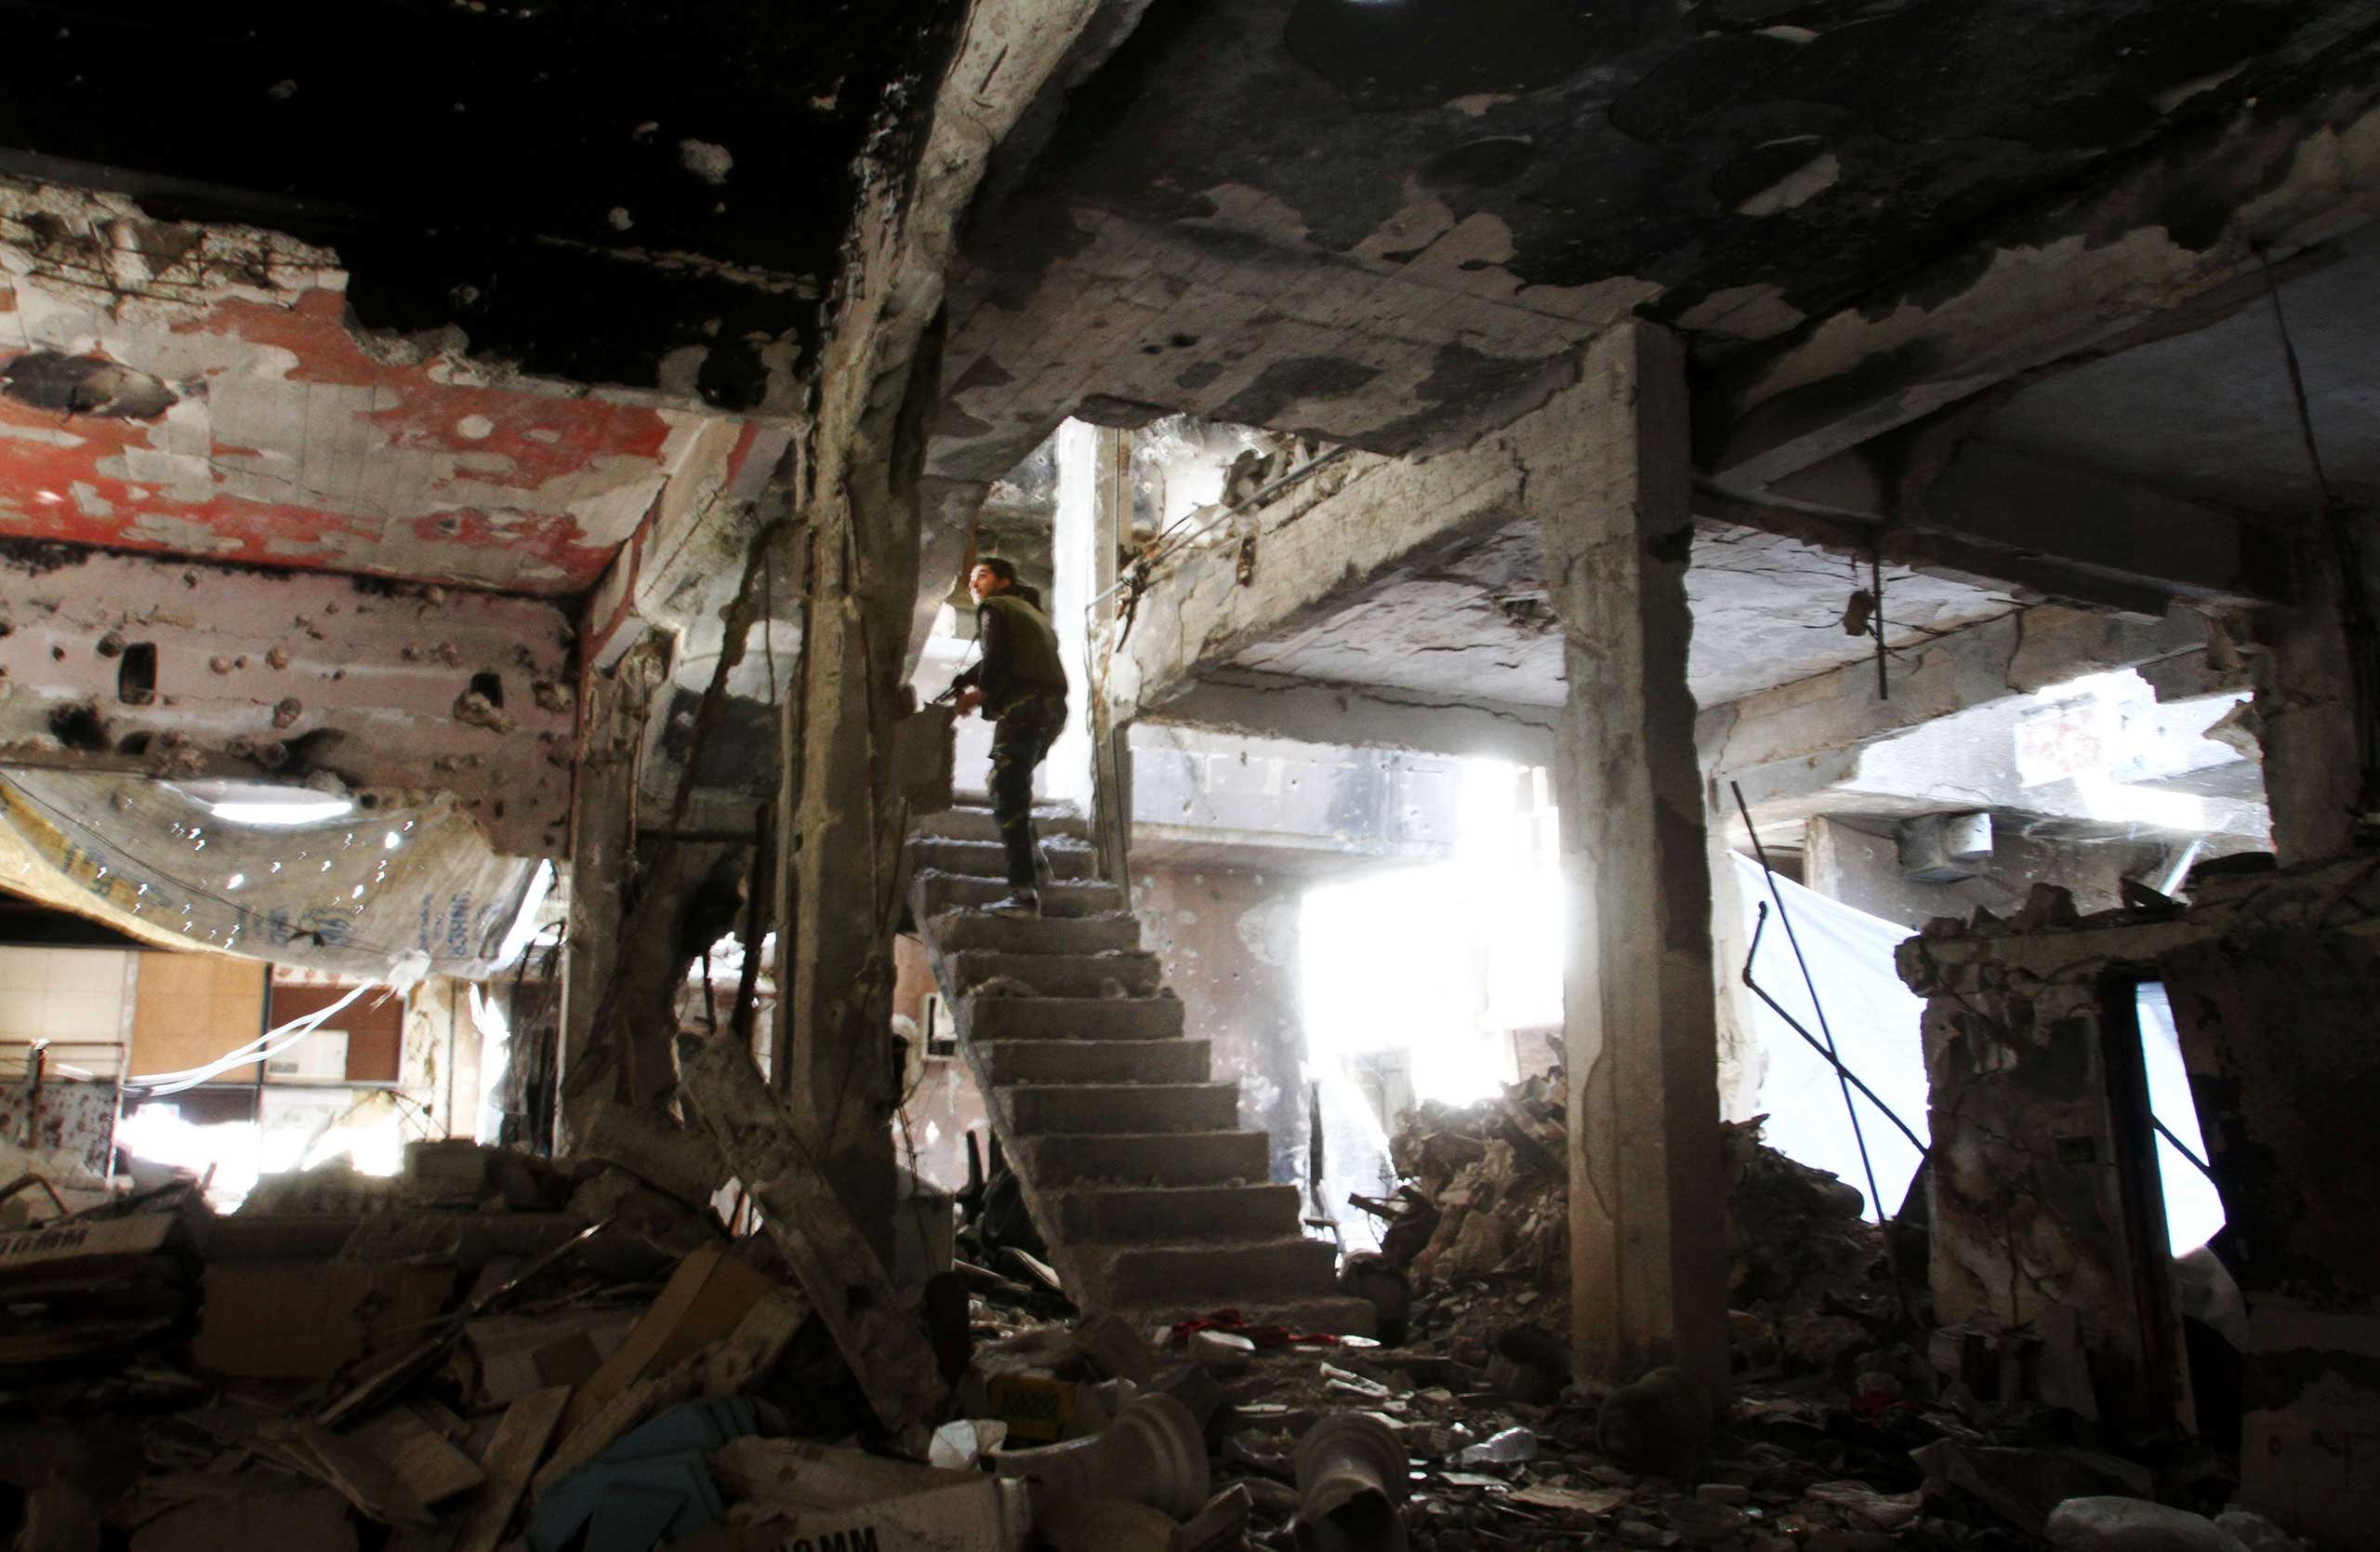 A man stands on a staircase inside a demolished building in the Yarmuk Palestinian refugee camp in the Syrian capital Damascus on April 6, 2015. (Youssef Karwashan—AFP/Getty Images)